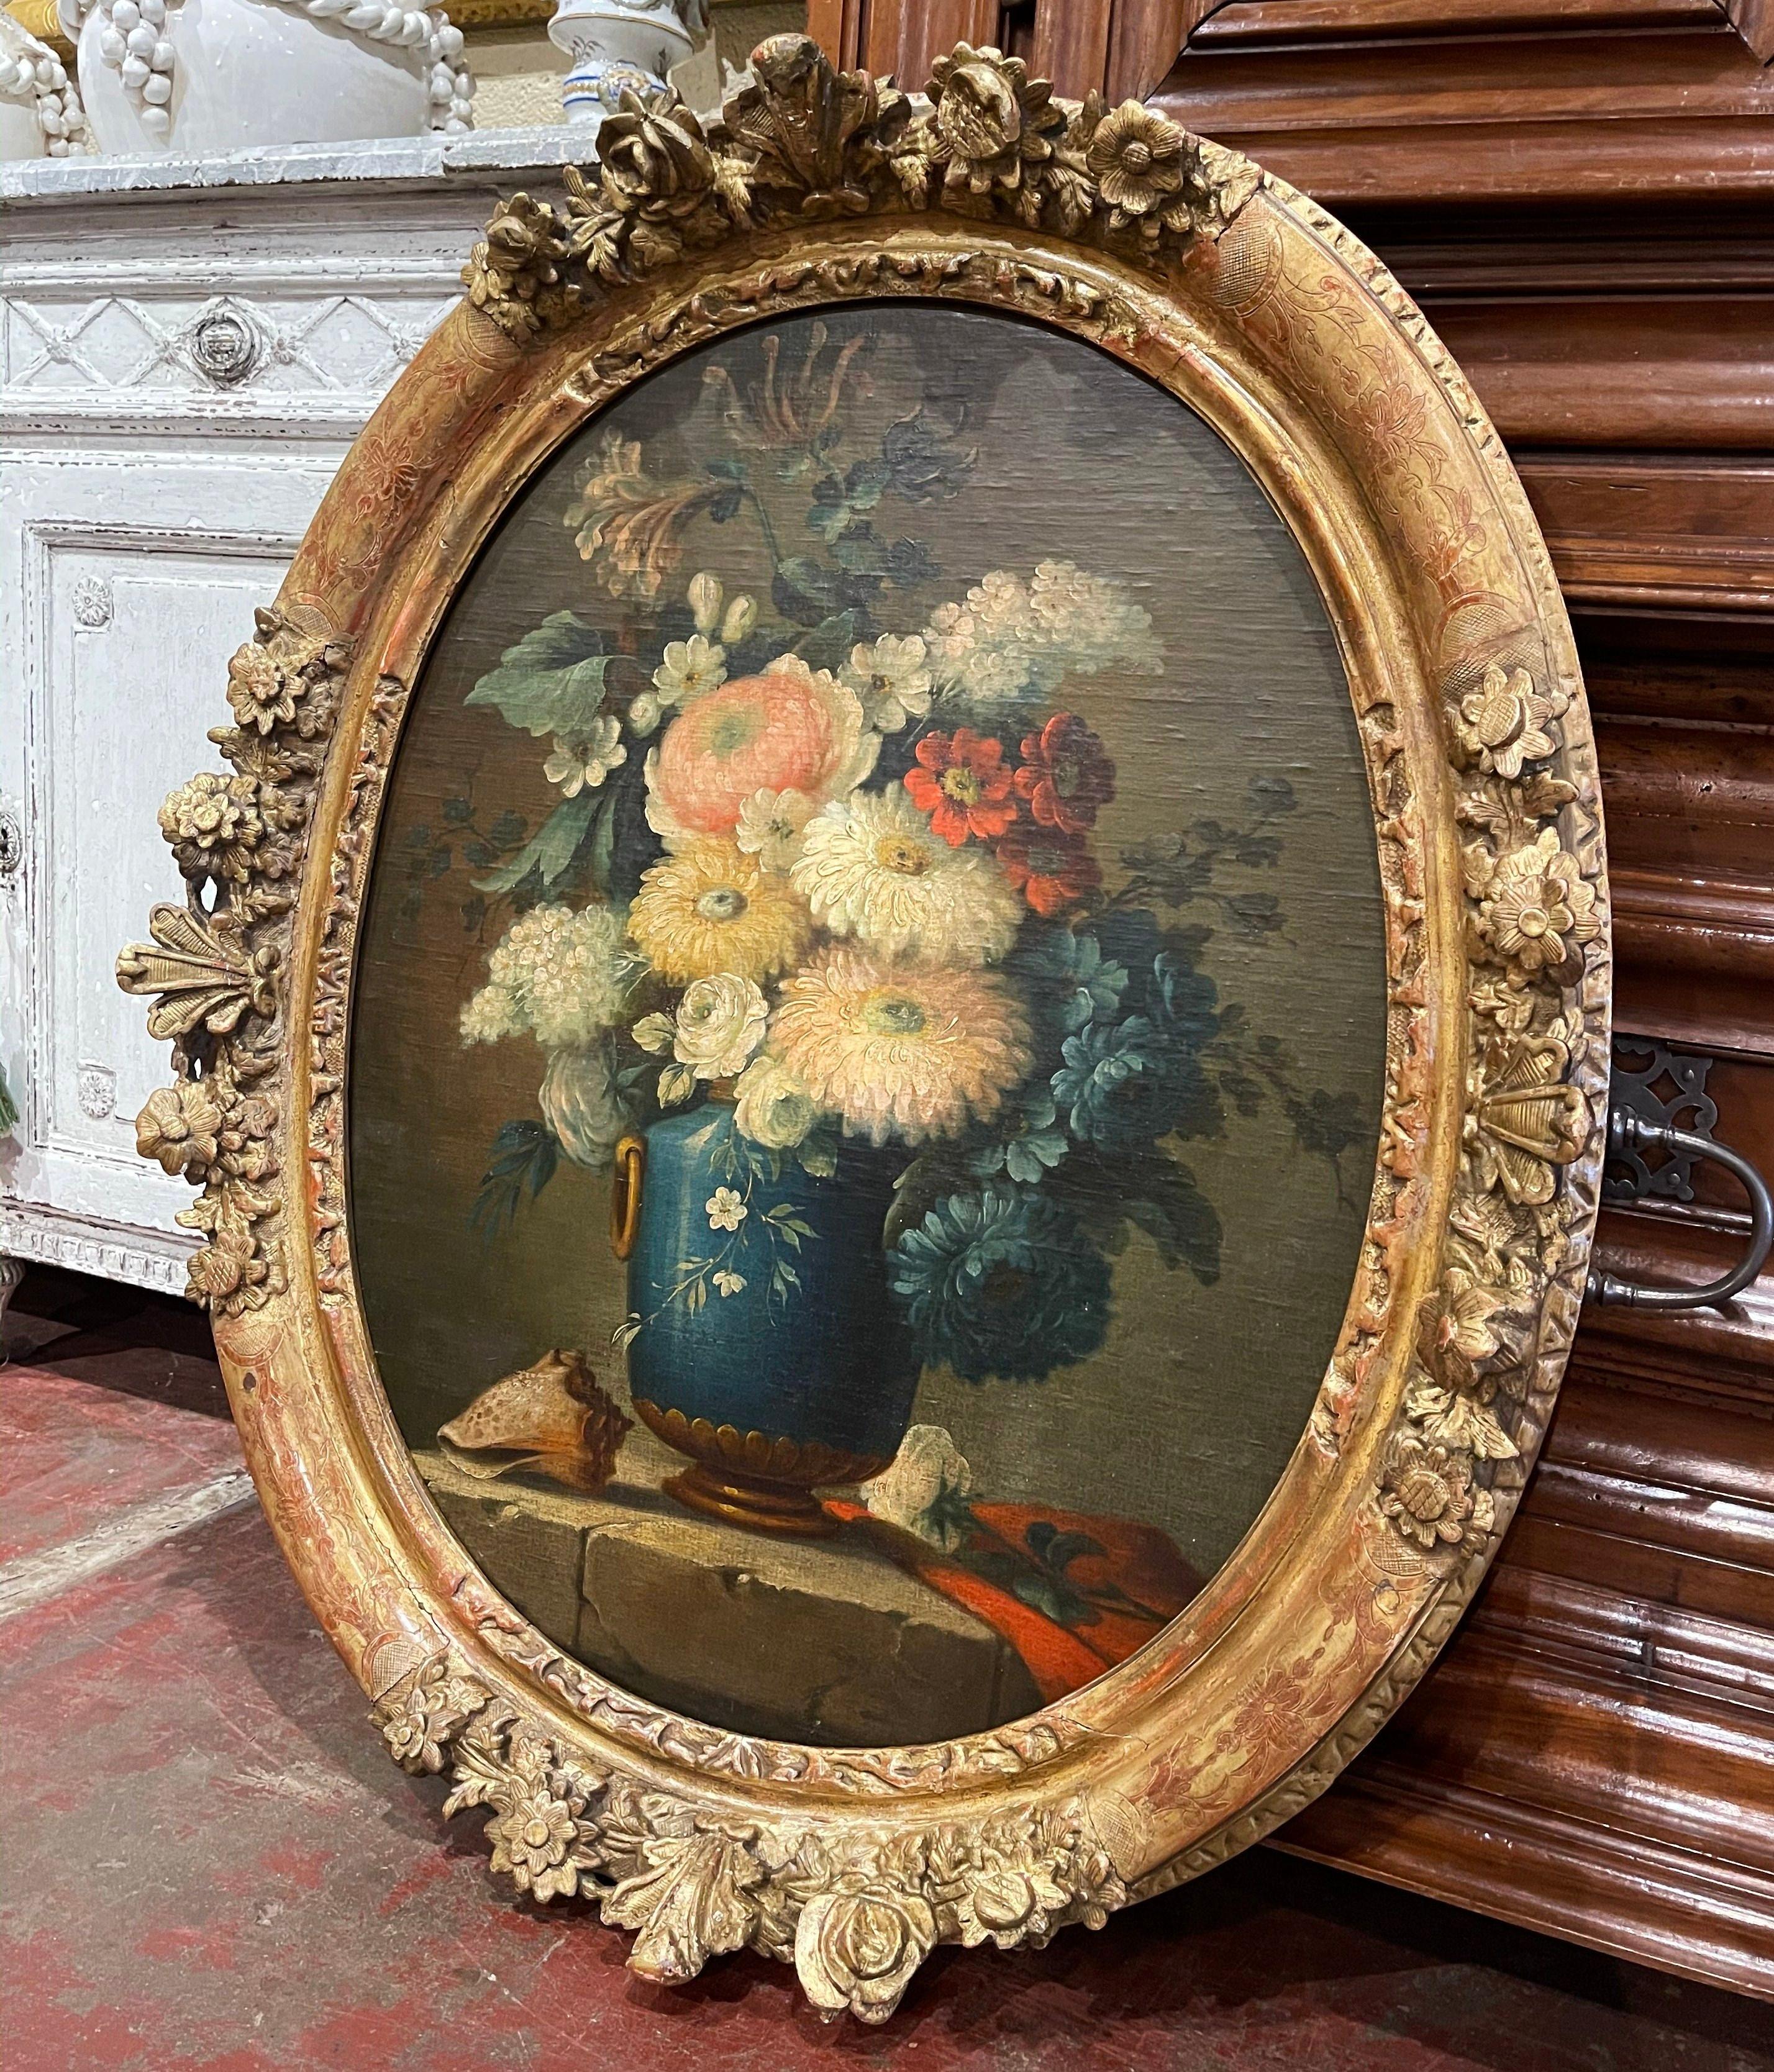 Invite color into your home with this elegant oil on board painting. Painted in France circa 1870 and set in a carved gilt frame, the colorful composition features a cobalt blue vase dressed with bronze handle and base, and filled with a floral